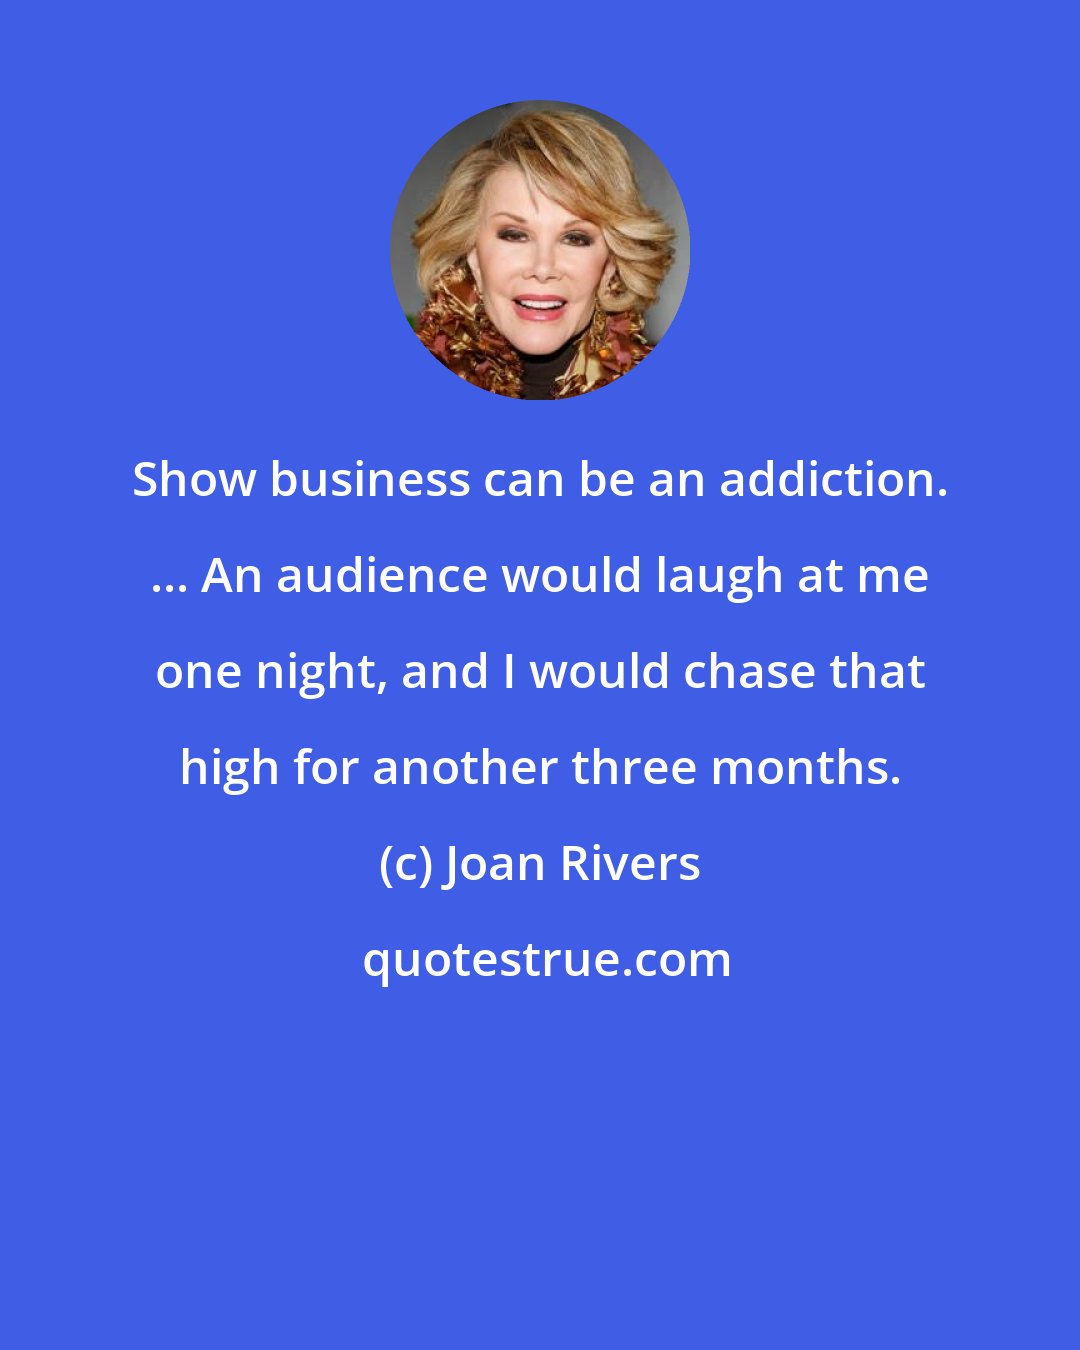 Joan Rivers: Show business can be an addiction. ... An audience would laugh at me one night, and I would chase that high for another three months.